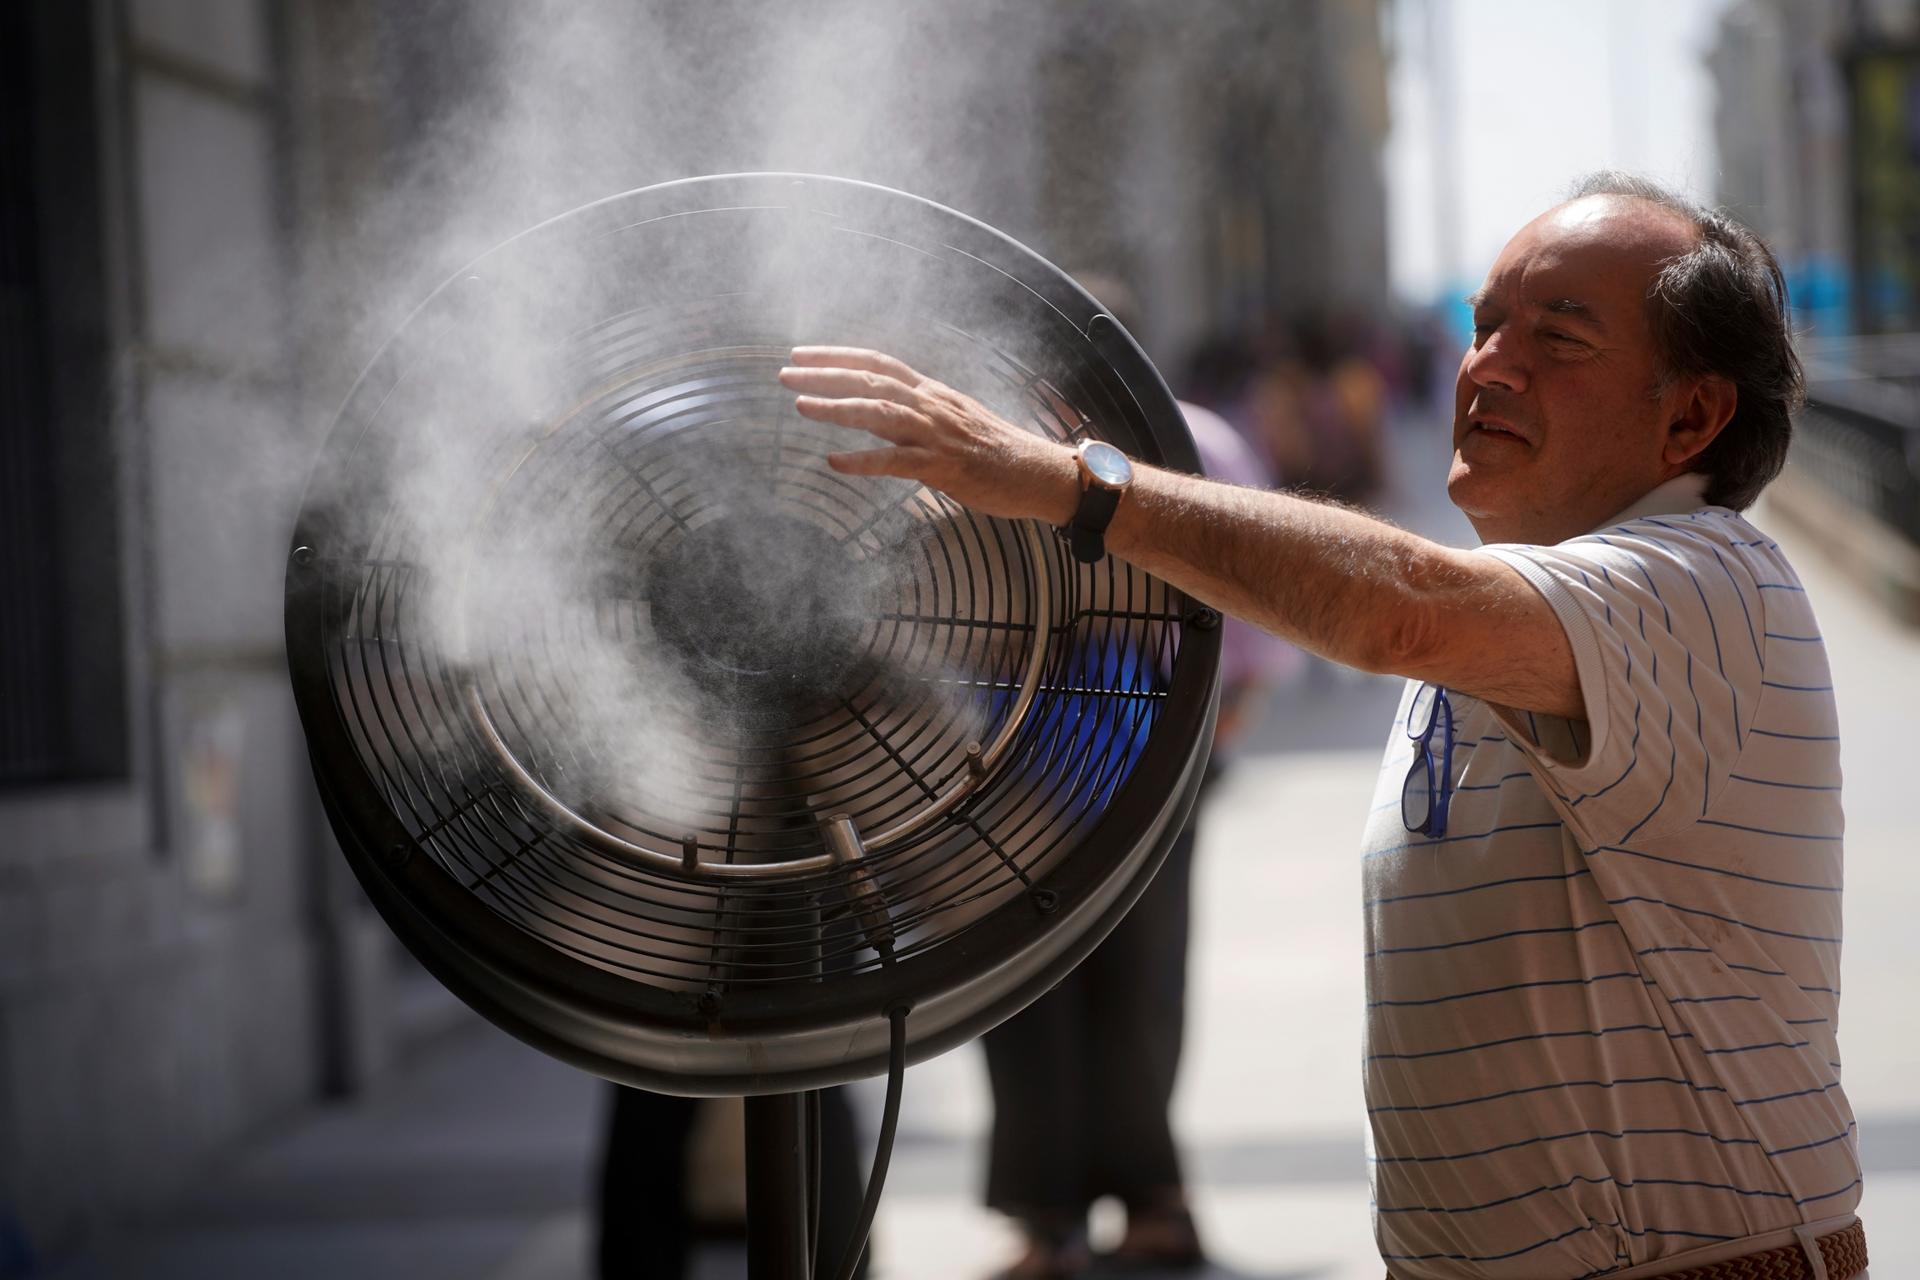 Man cools himself down with huge fan and water splash 